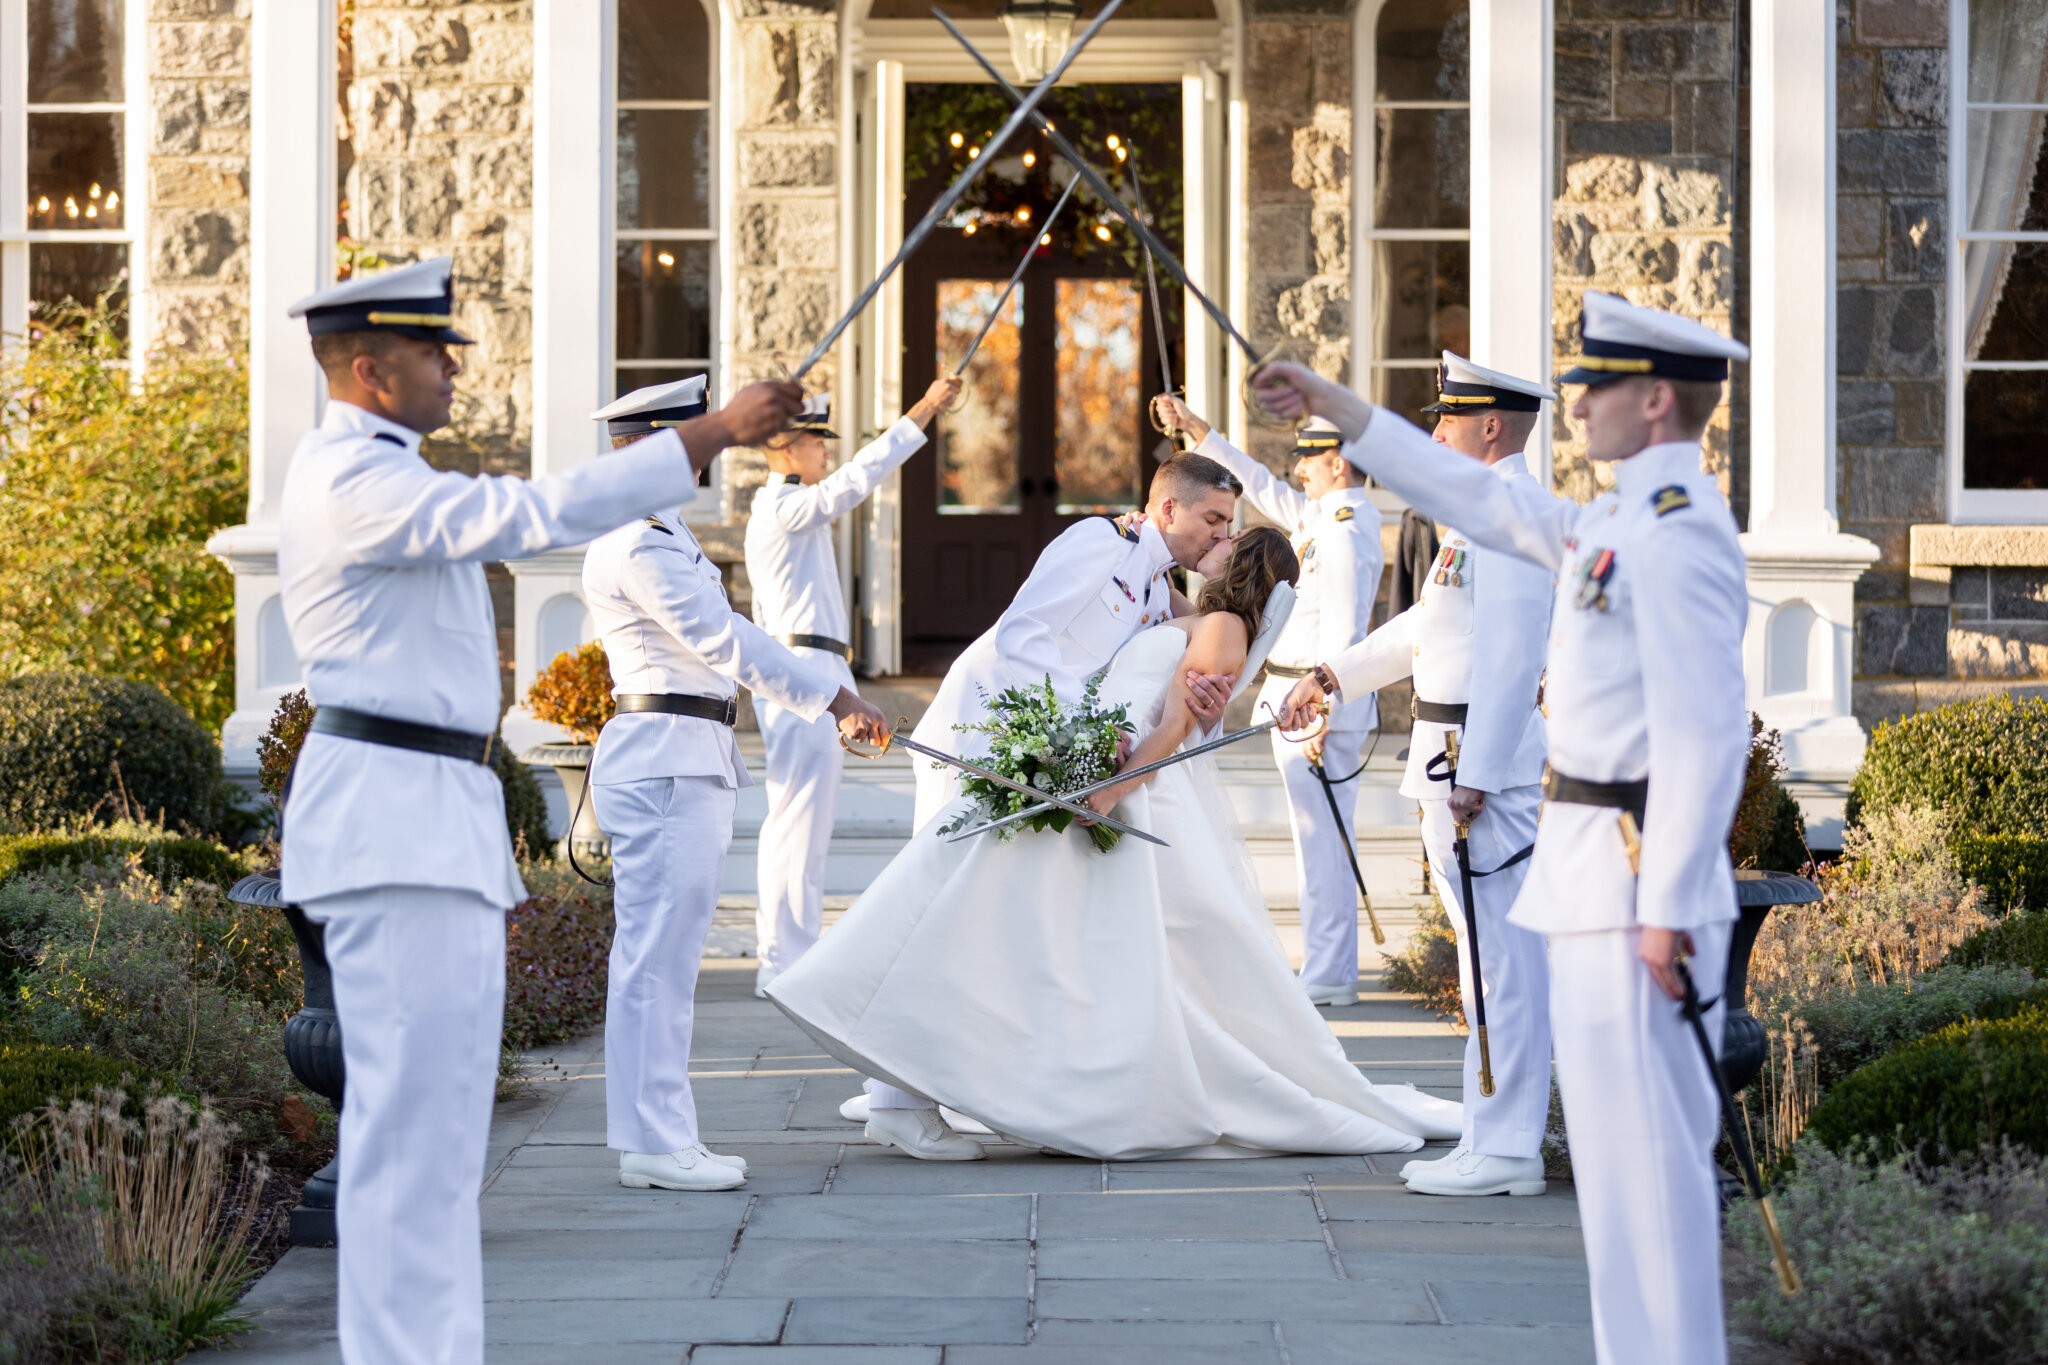 The Veterans Day Wedding Giveback is open to local veterans